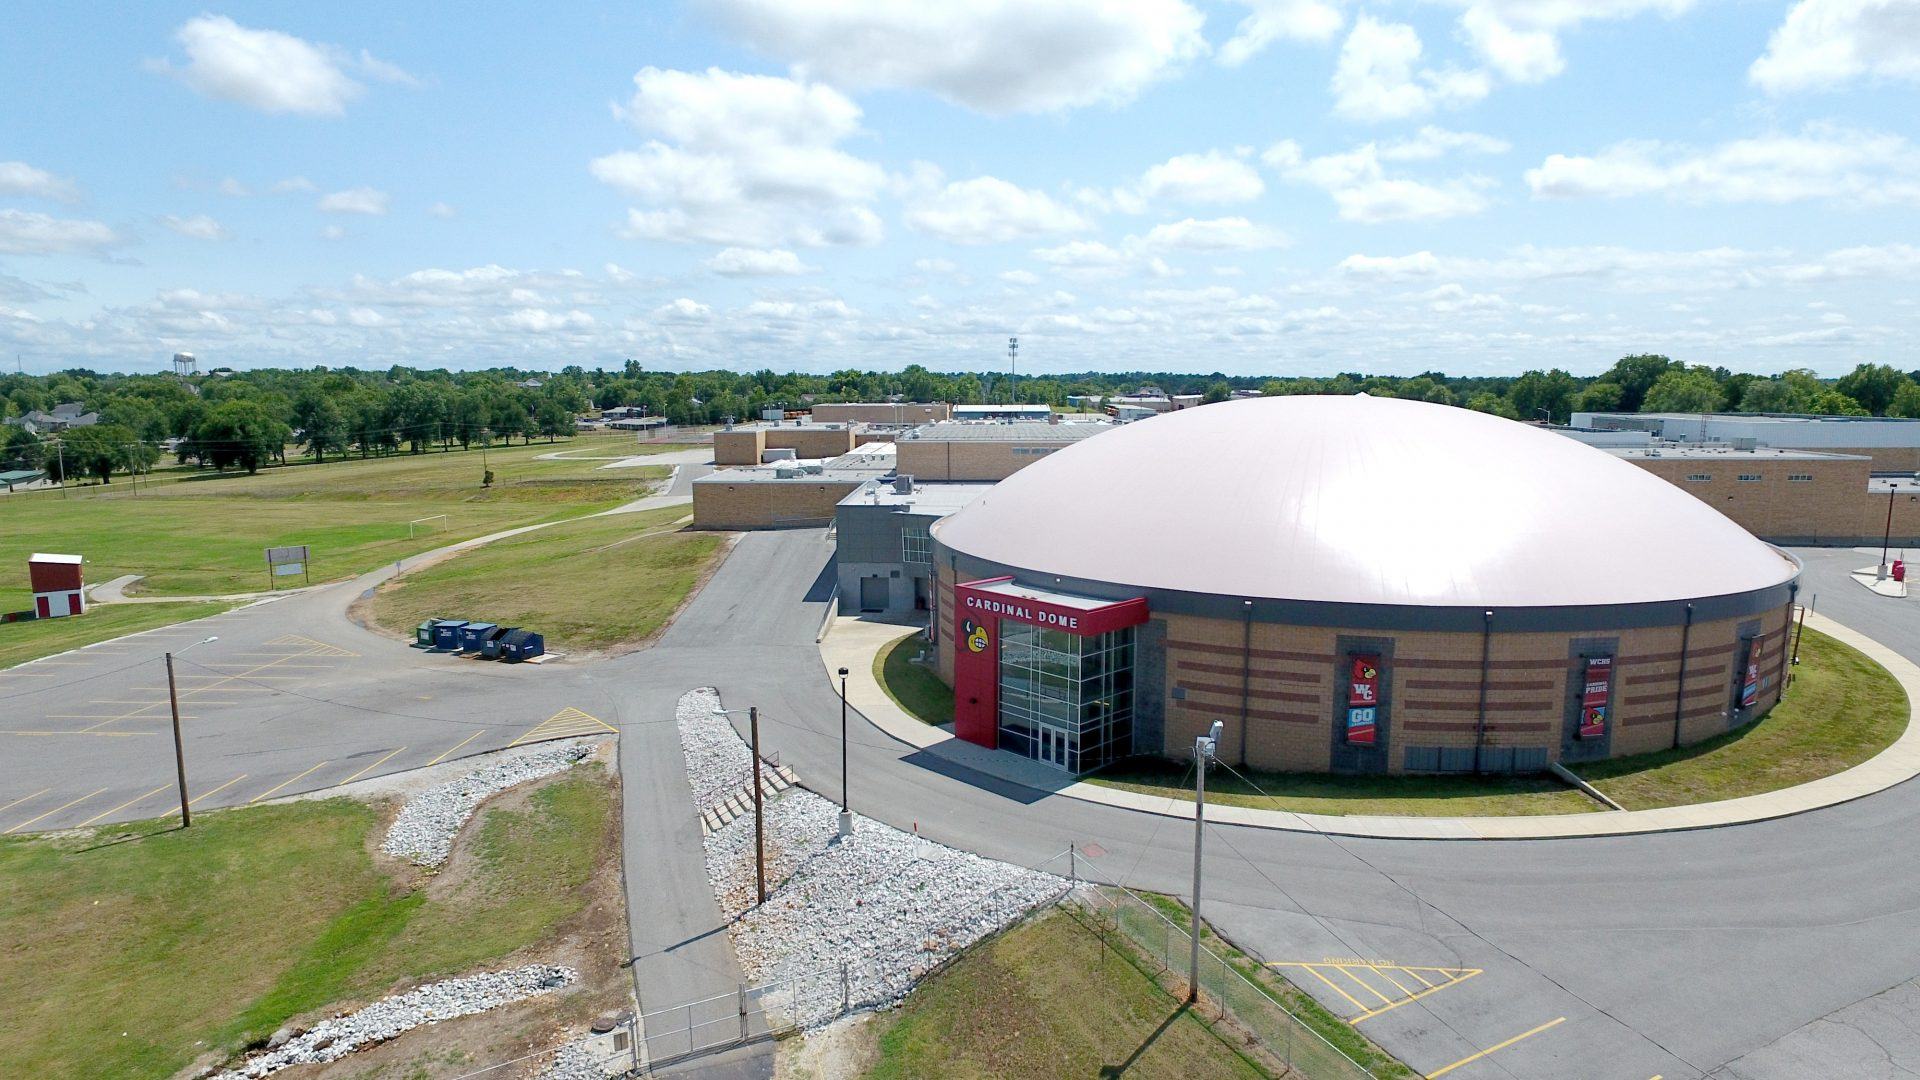 webb-city-high-school-storm-shelter-united-states-dome-technology